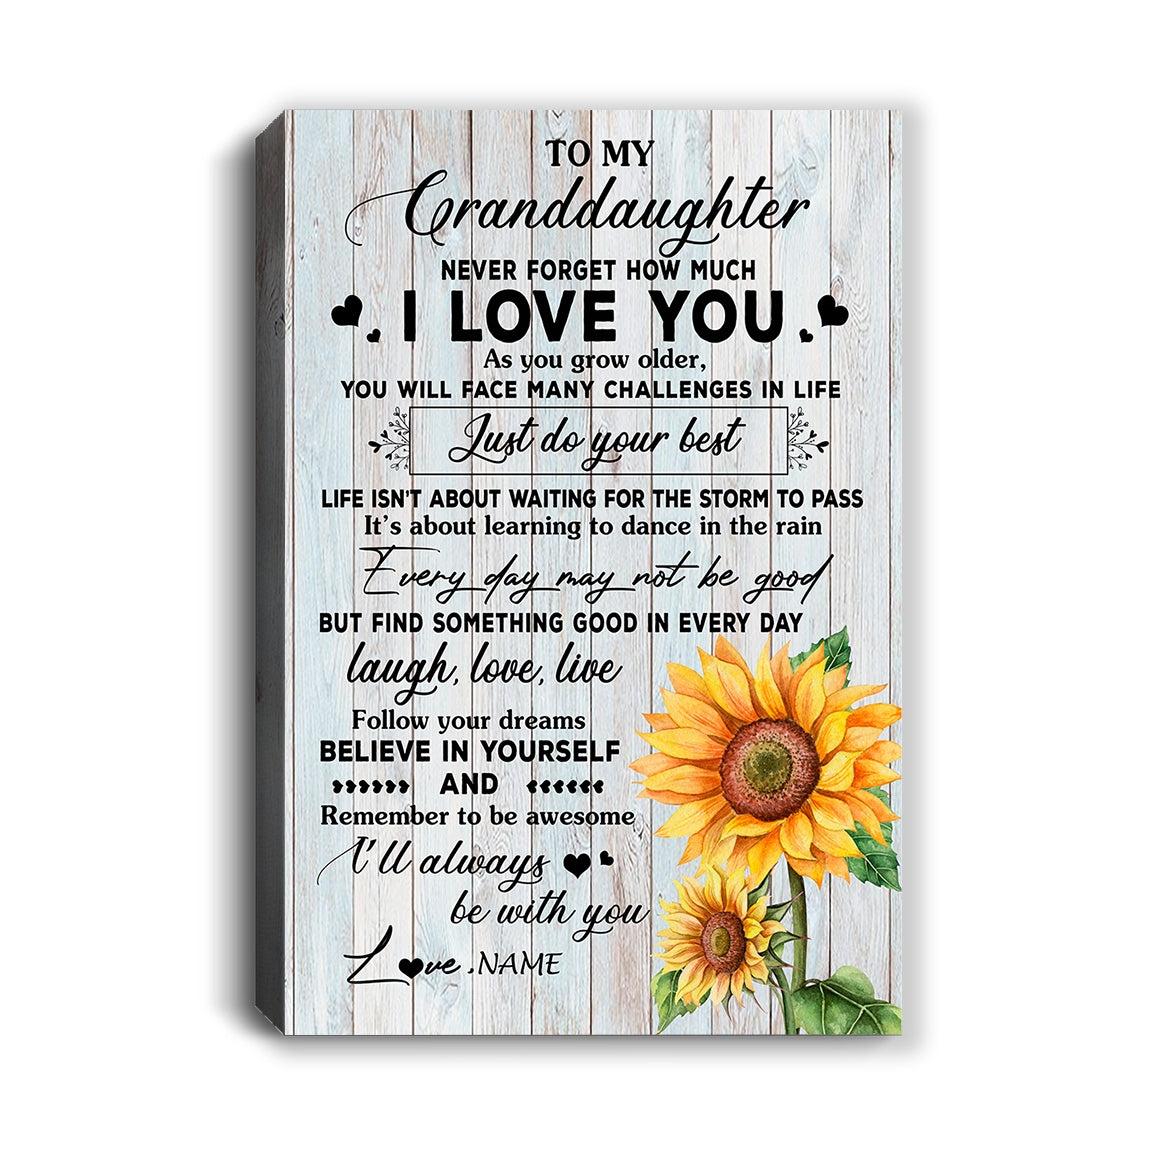 Dear Great-Grandchild The Way You Speak To Yourself Matters Inspirational Gift  Positive Quote Self-talk Saying #1 Spiral Notebook by Jeff Creation - Pixels